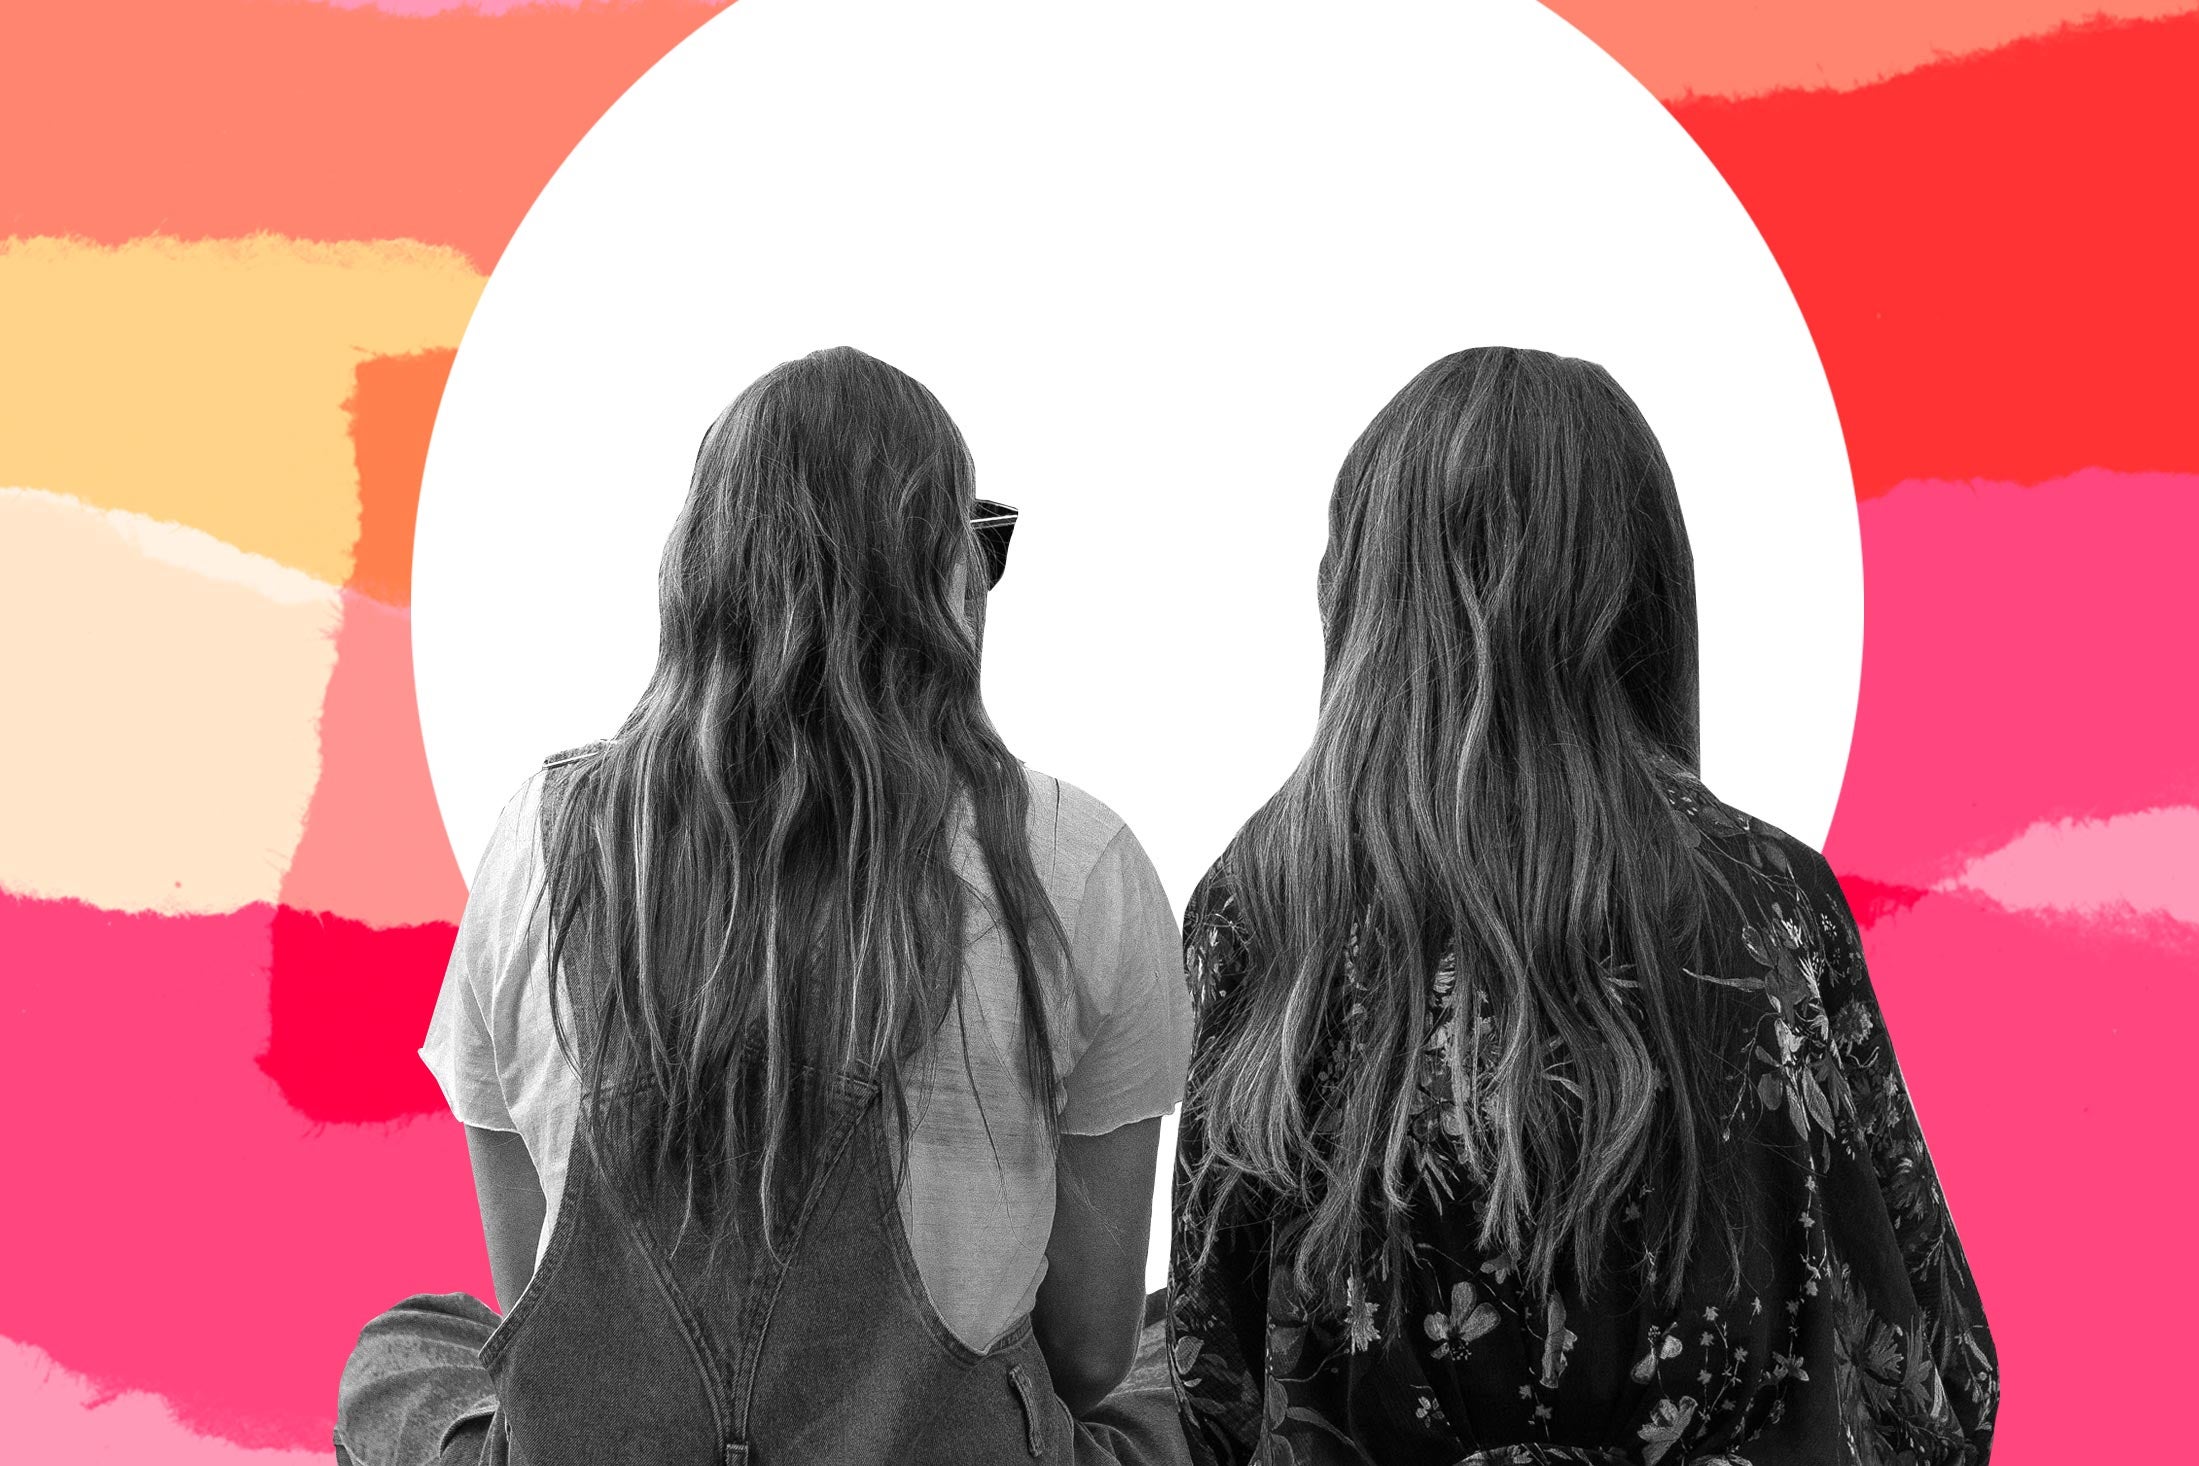 Photo illustration of two young women with their backs facing toward the camera.